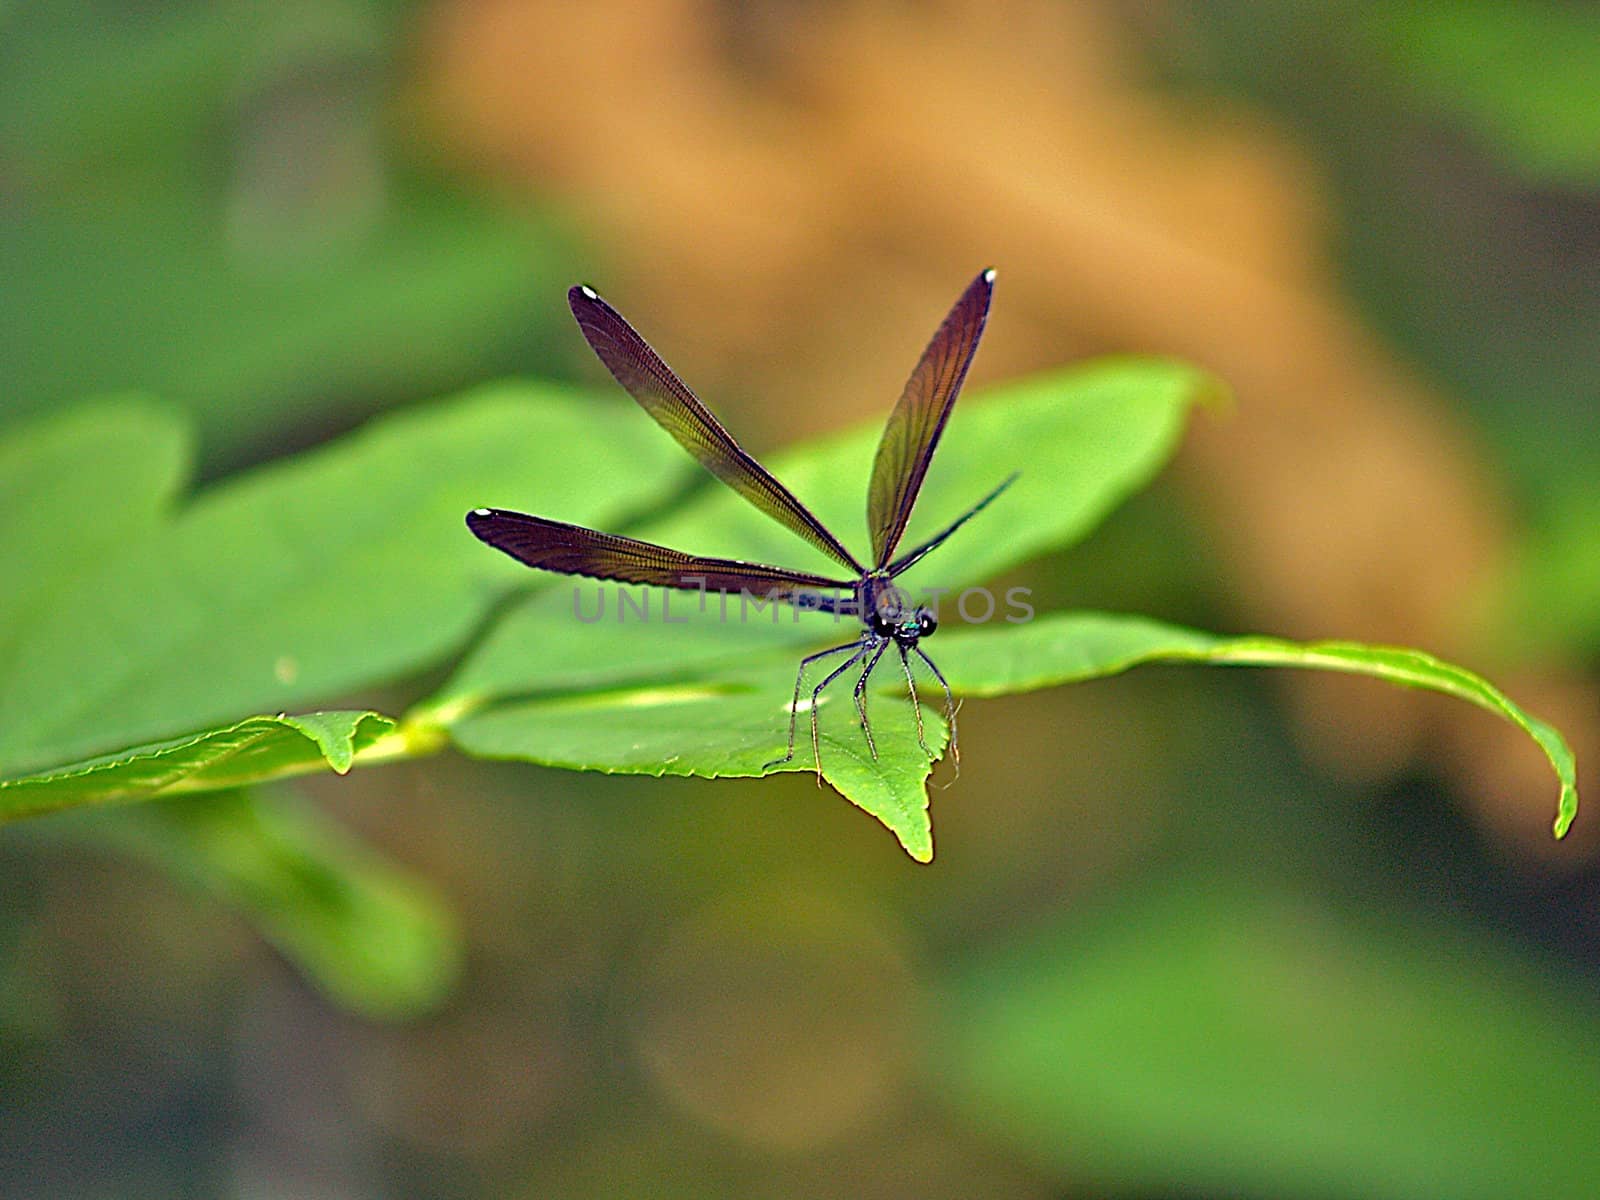 Dragonfly with wings open sitting on a leaf by dmvphotos